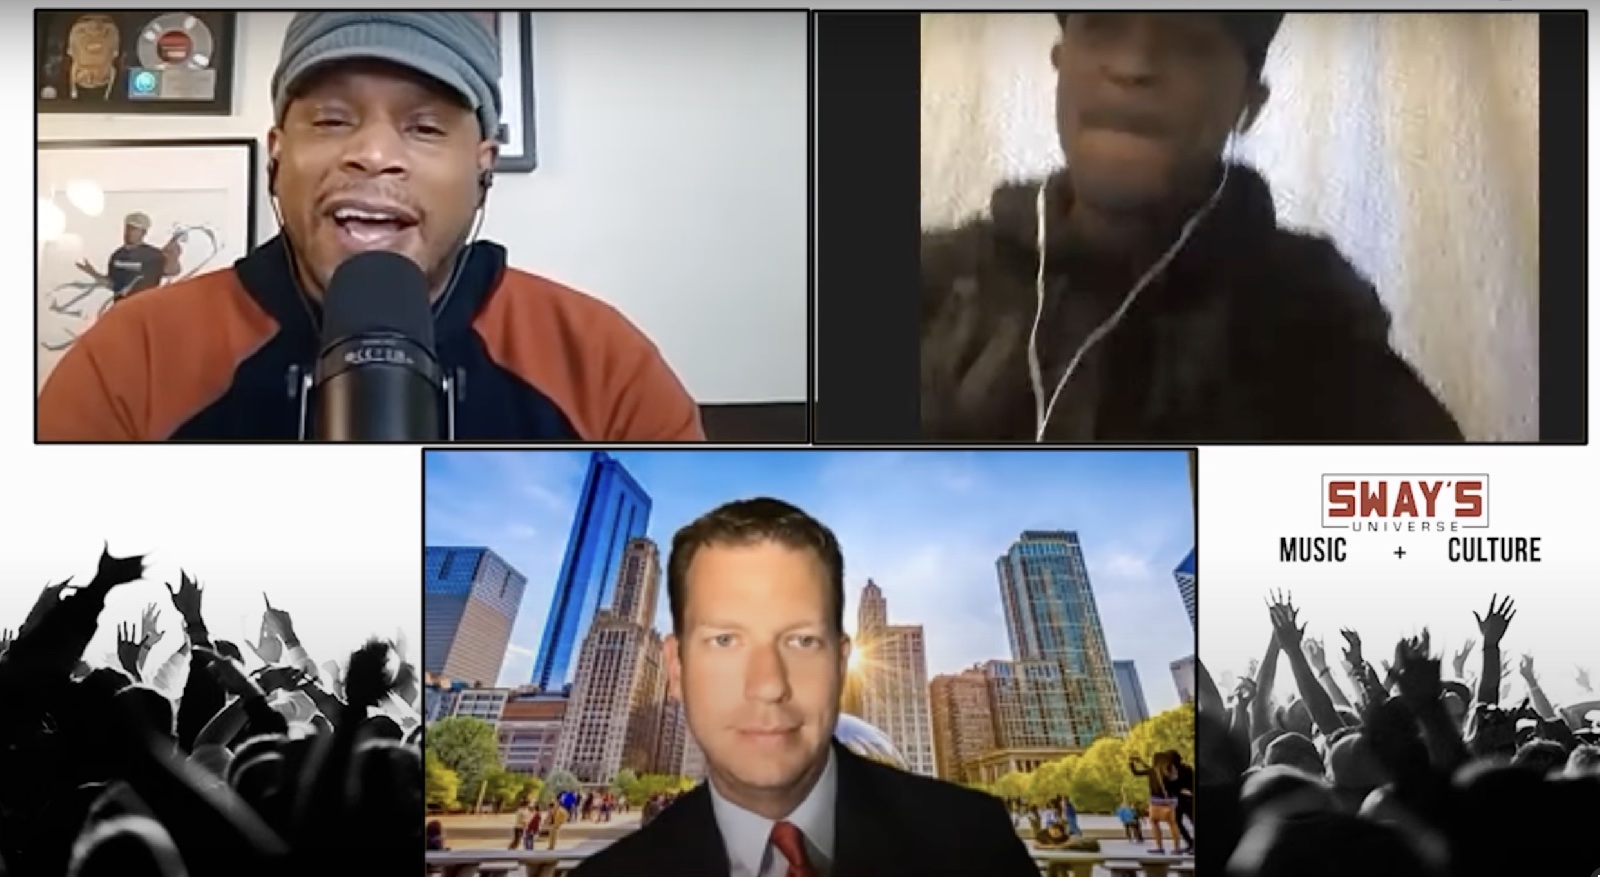 JT Foxx with SWAY'S UNIVERSE